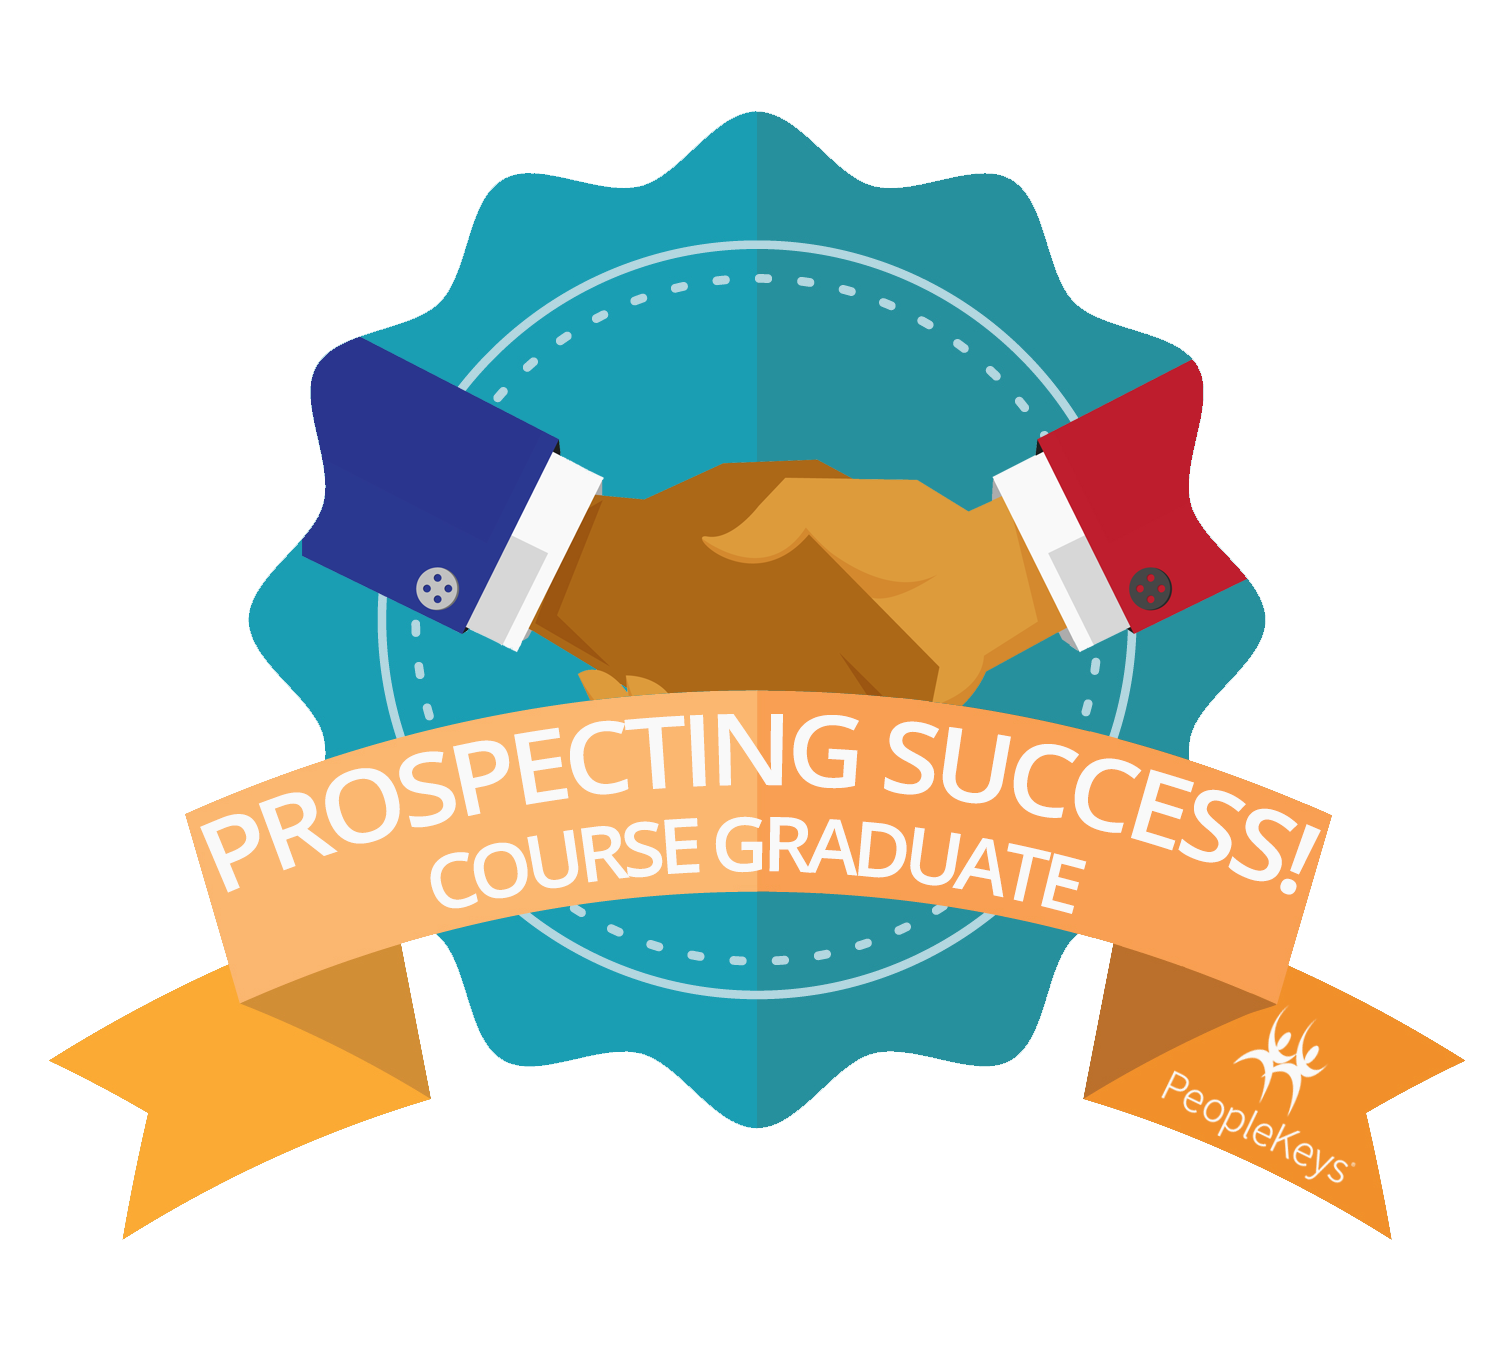 Successfully complete the Prospecting Success! course and gain a digital badge to show off on your LinkedIn page, email signature and more.